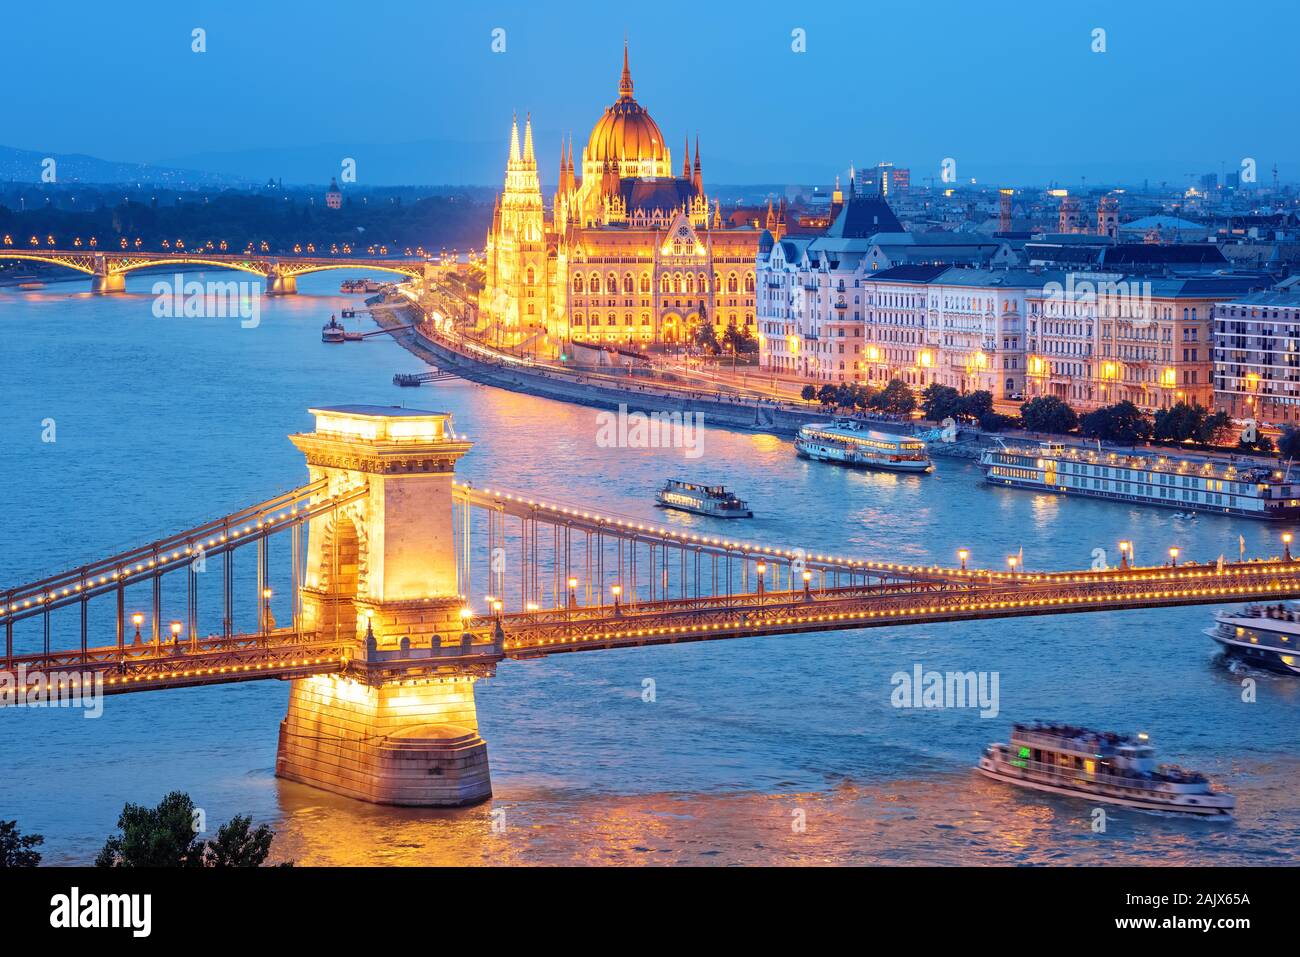 Budapest city, Hungary, view of the Chain bridge over Danube river and Parliament building glowing gold in blue evening light Stock Photo